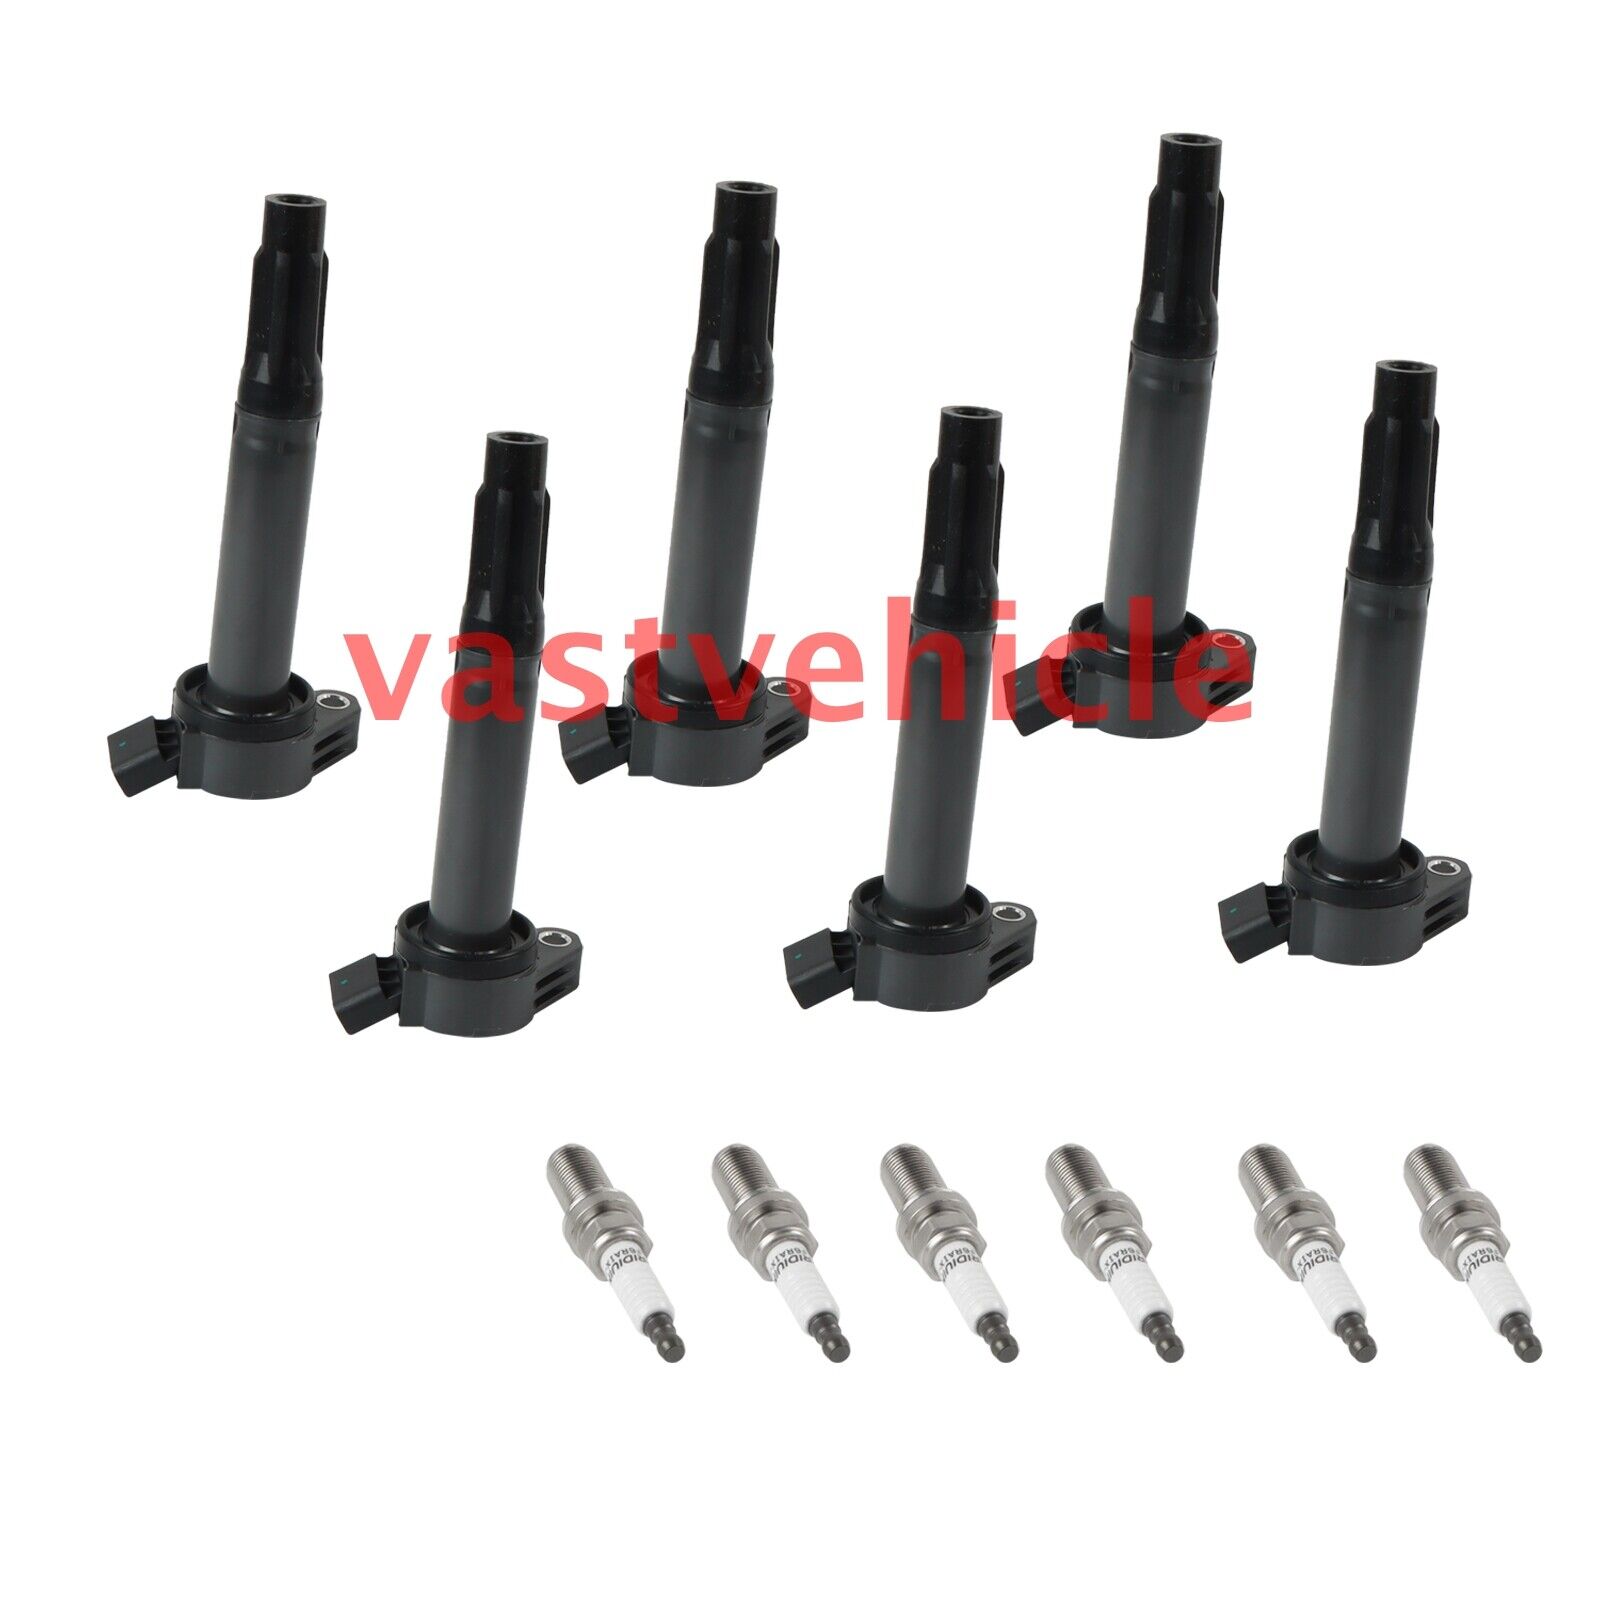 6PCS Ignition Coil and Spark Plug For 2005-2018 19 Toyota Avalon 3.5L